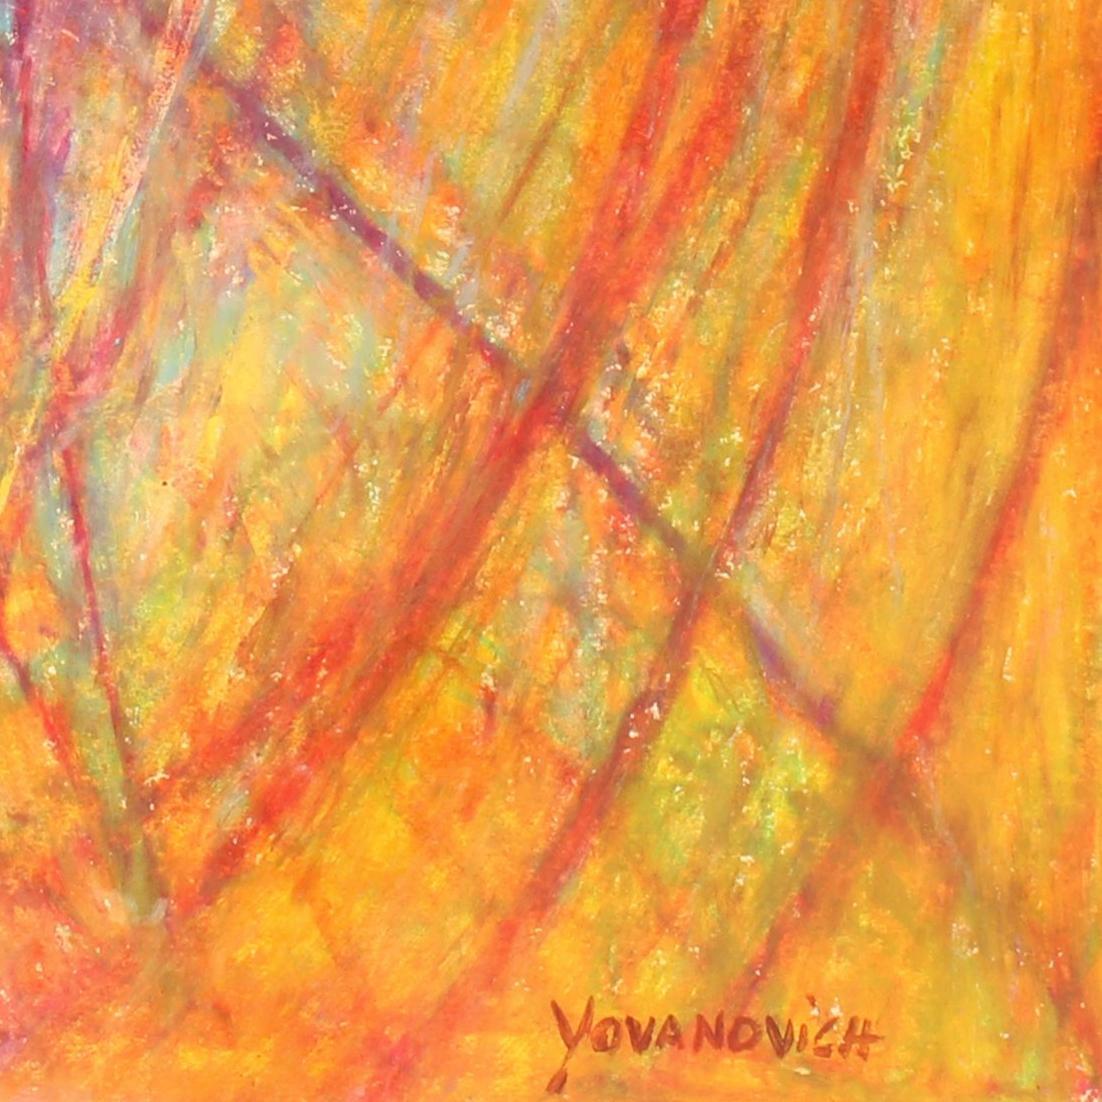 A original mixed media monotype and pastel on paper by modern artist Toma Yovanovich.